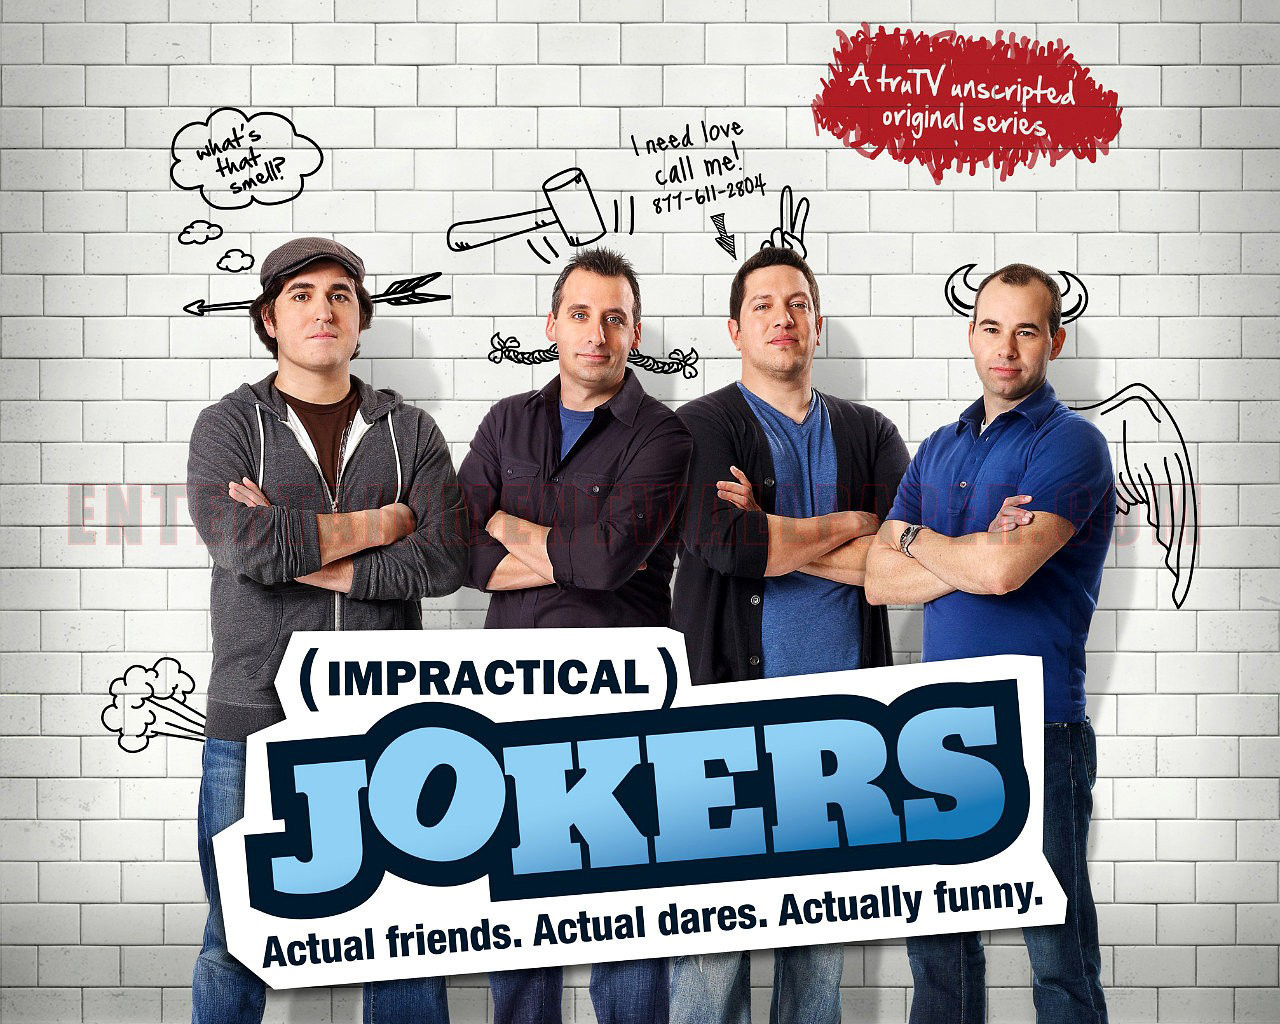 http://www.trutv.com/shows/impractical-jokers/videos/whose-phone-is-ringing.html